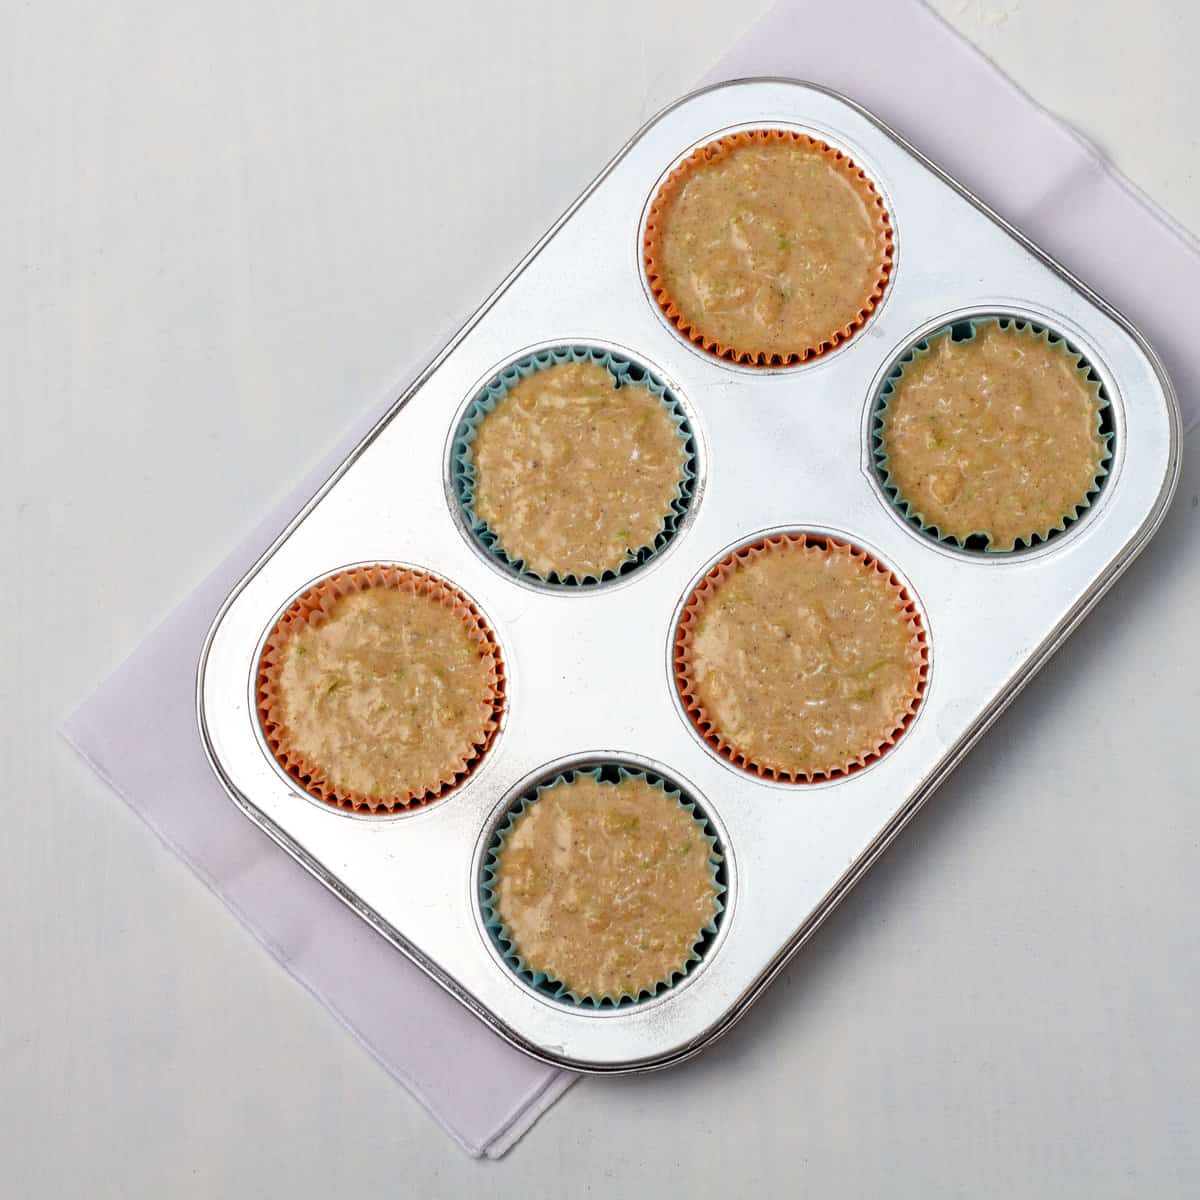 All muffin batter ingredients poured into a muffin tin lined with paper liners. 